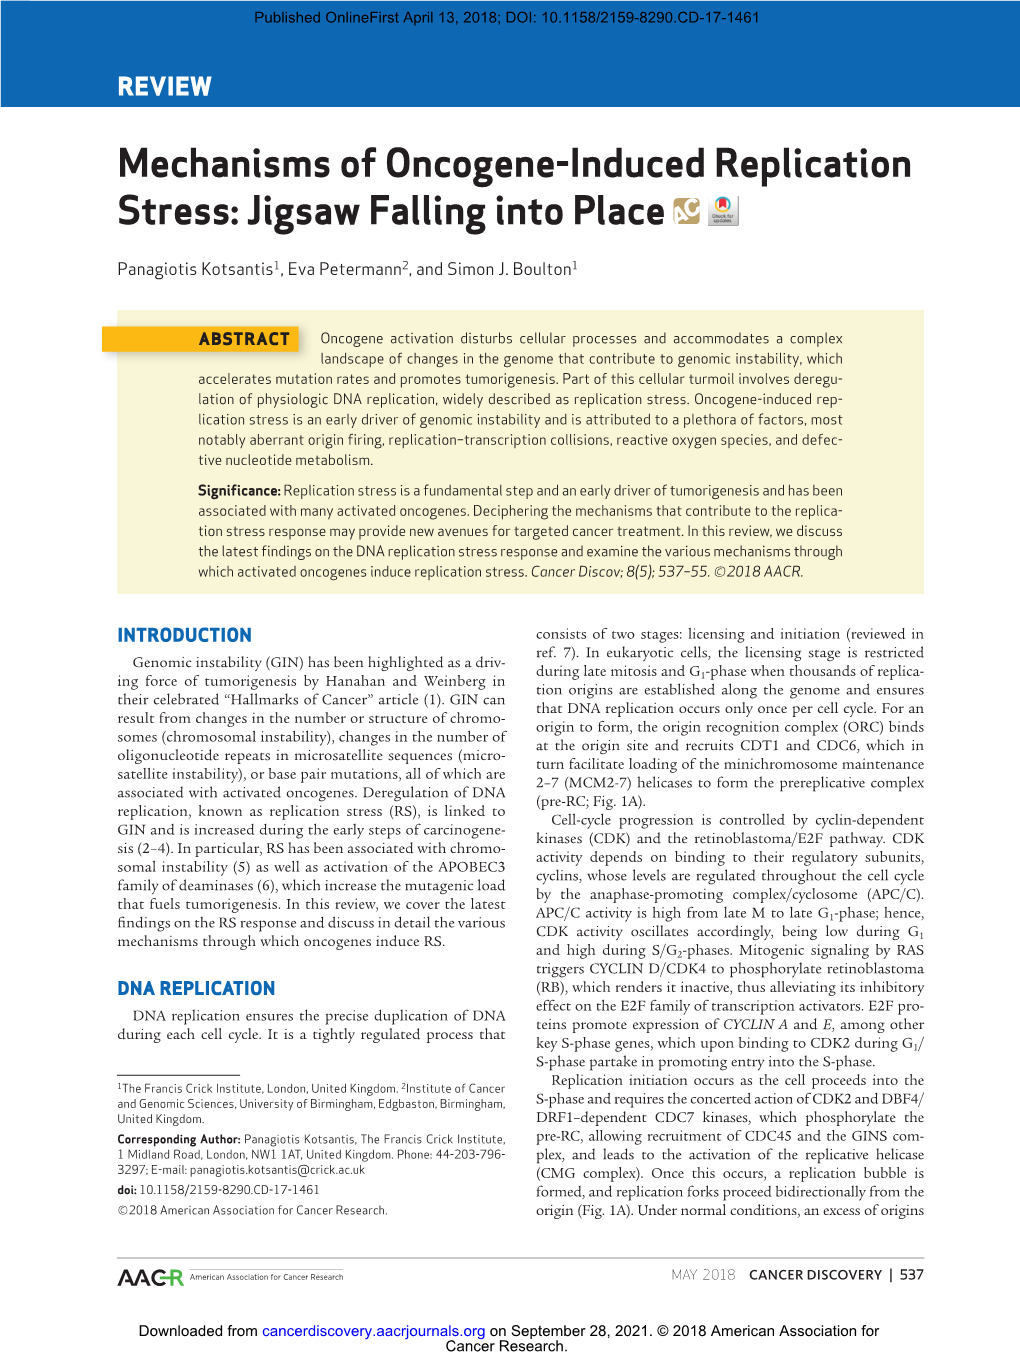 Mechanisms of Oncogene-Induced Replication Stress: Jigsaw Falling Into Place